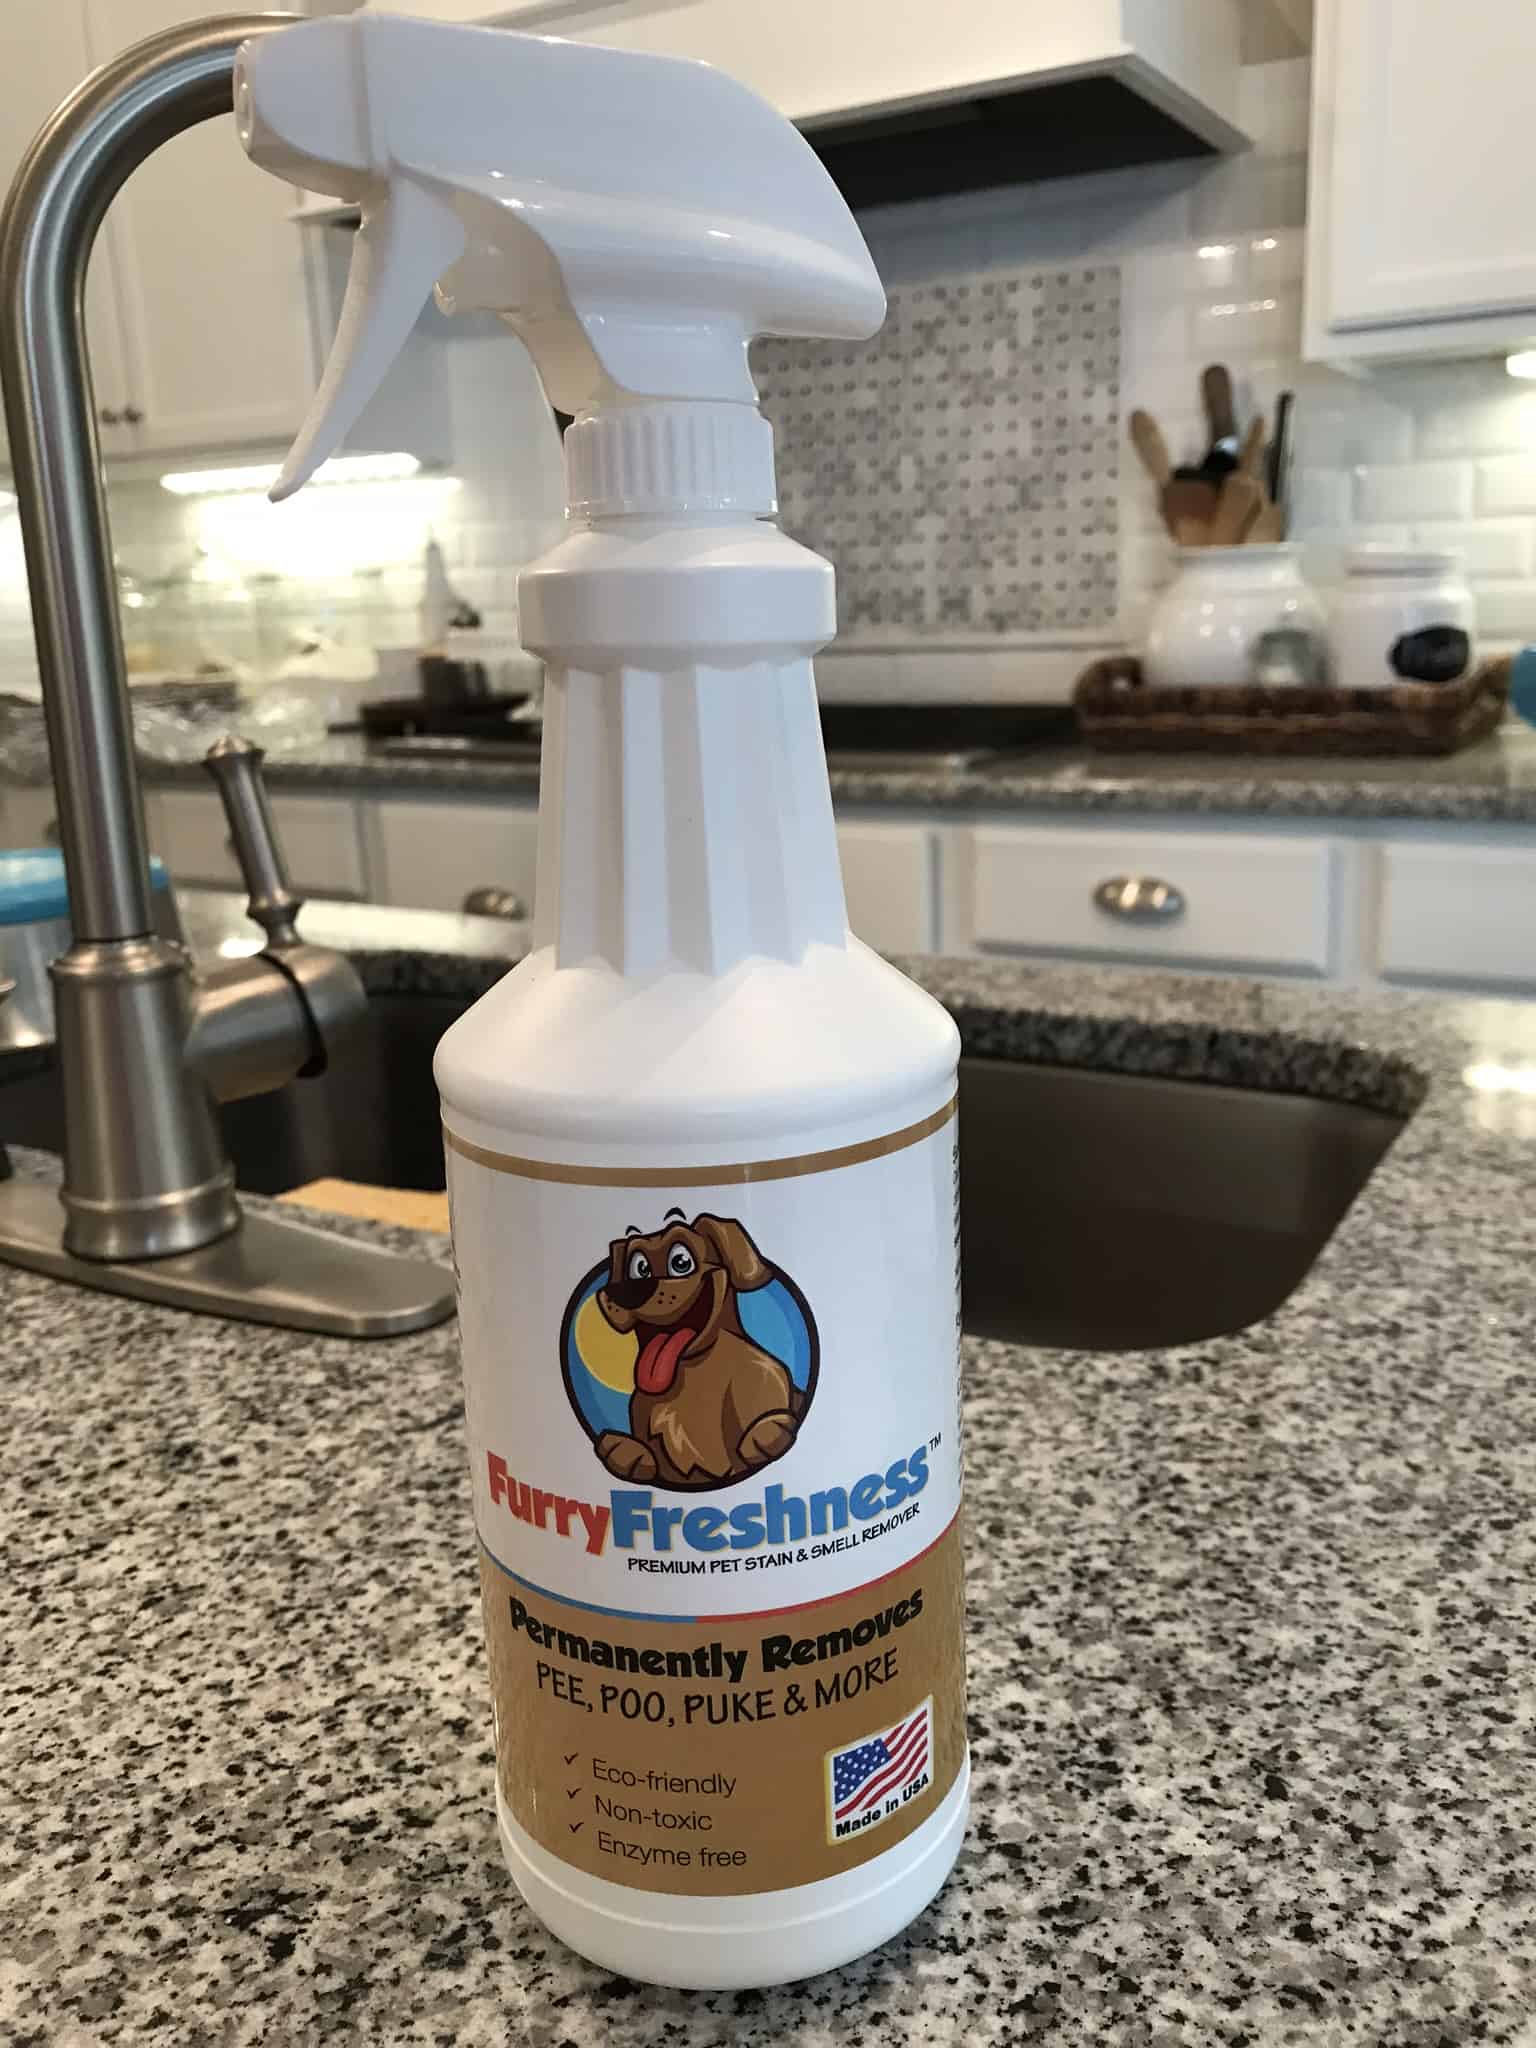 Furry Freshness Pet Stain Remover